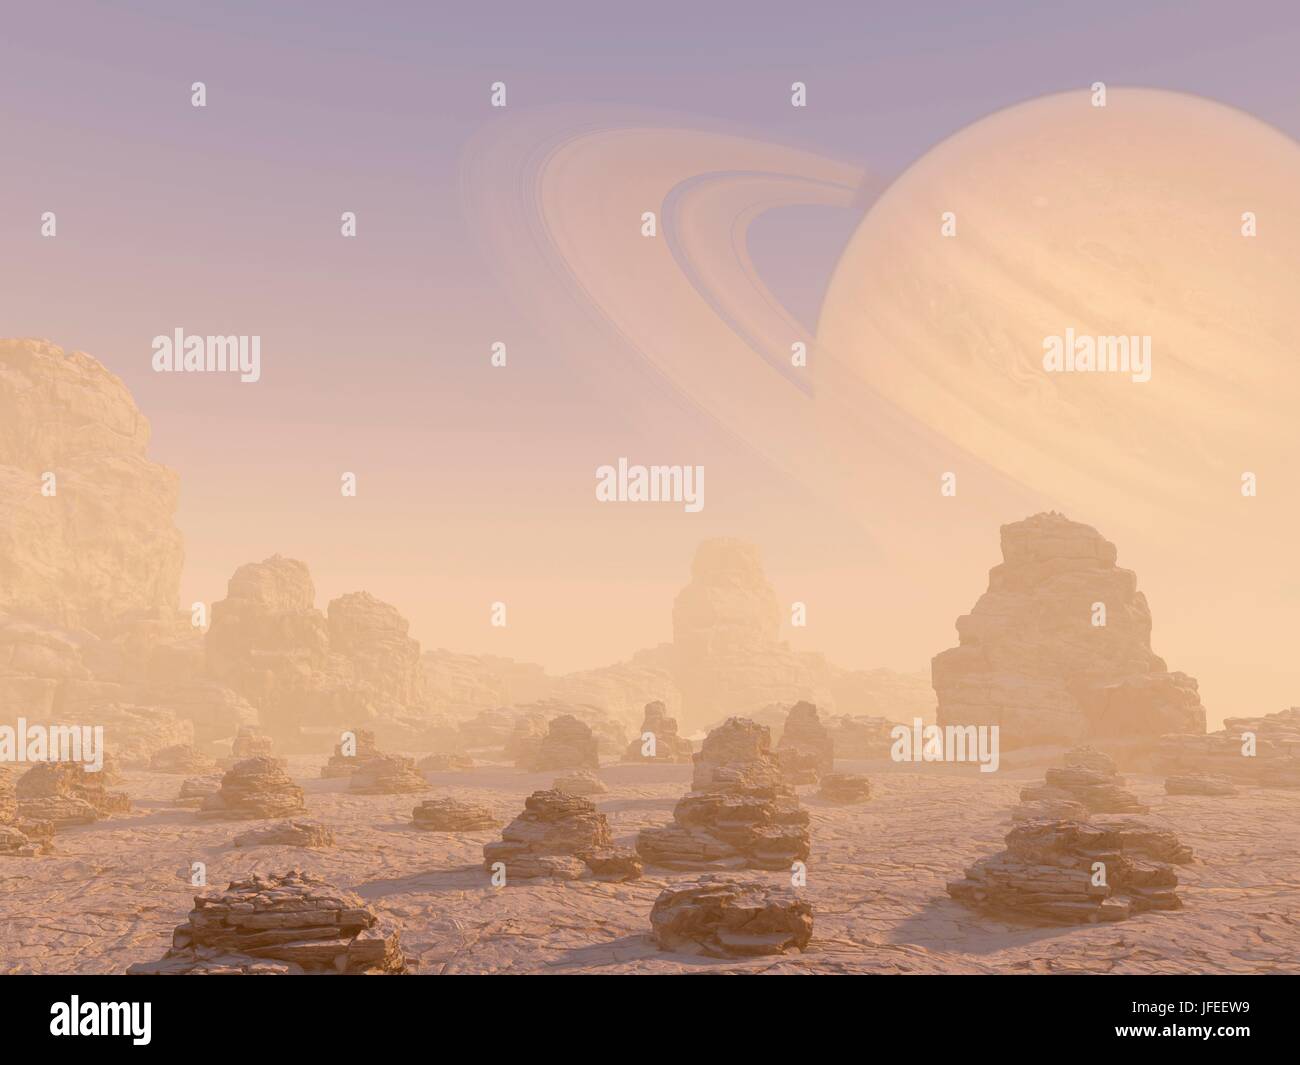 Rocky surface with planet and rings in distance, illustration. Stock Photo